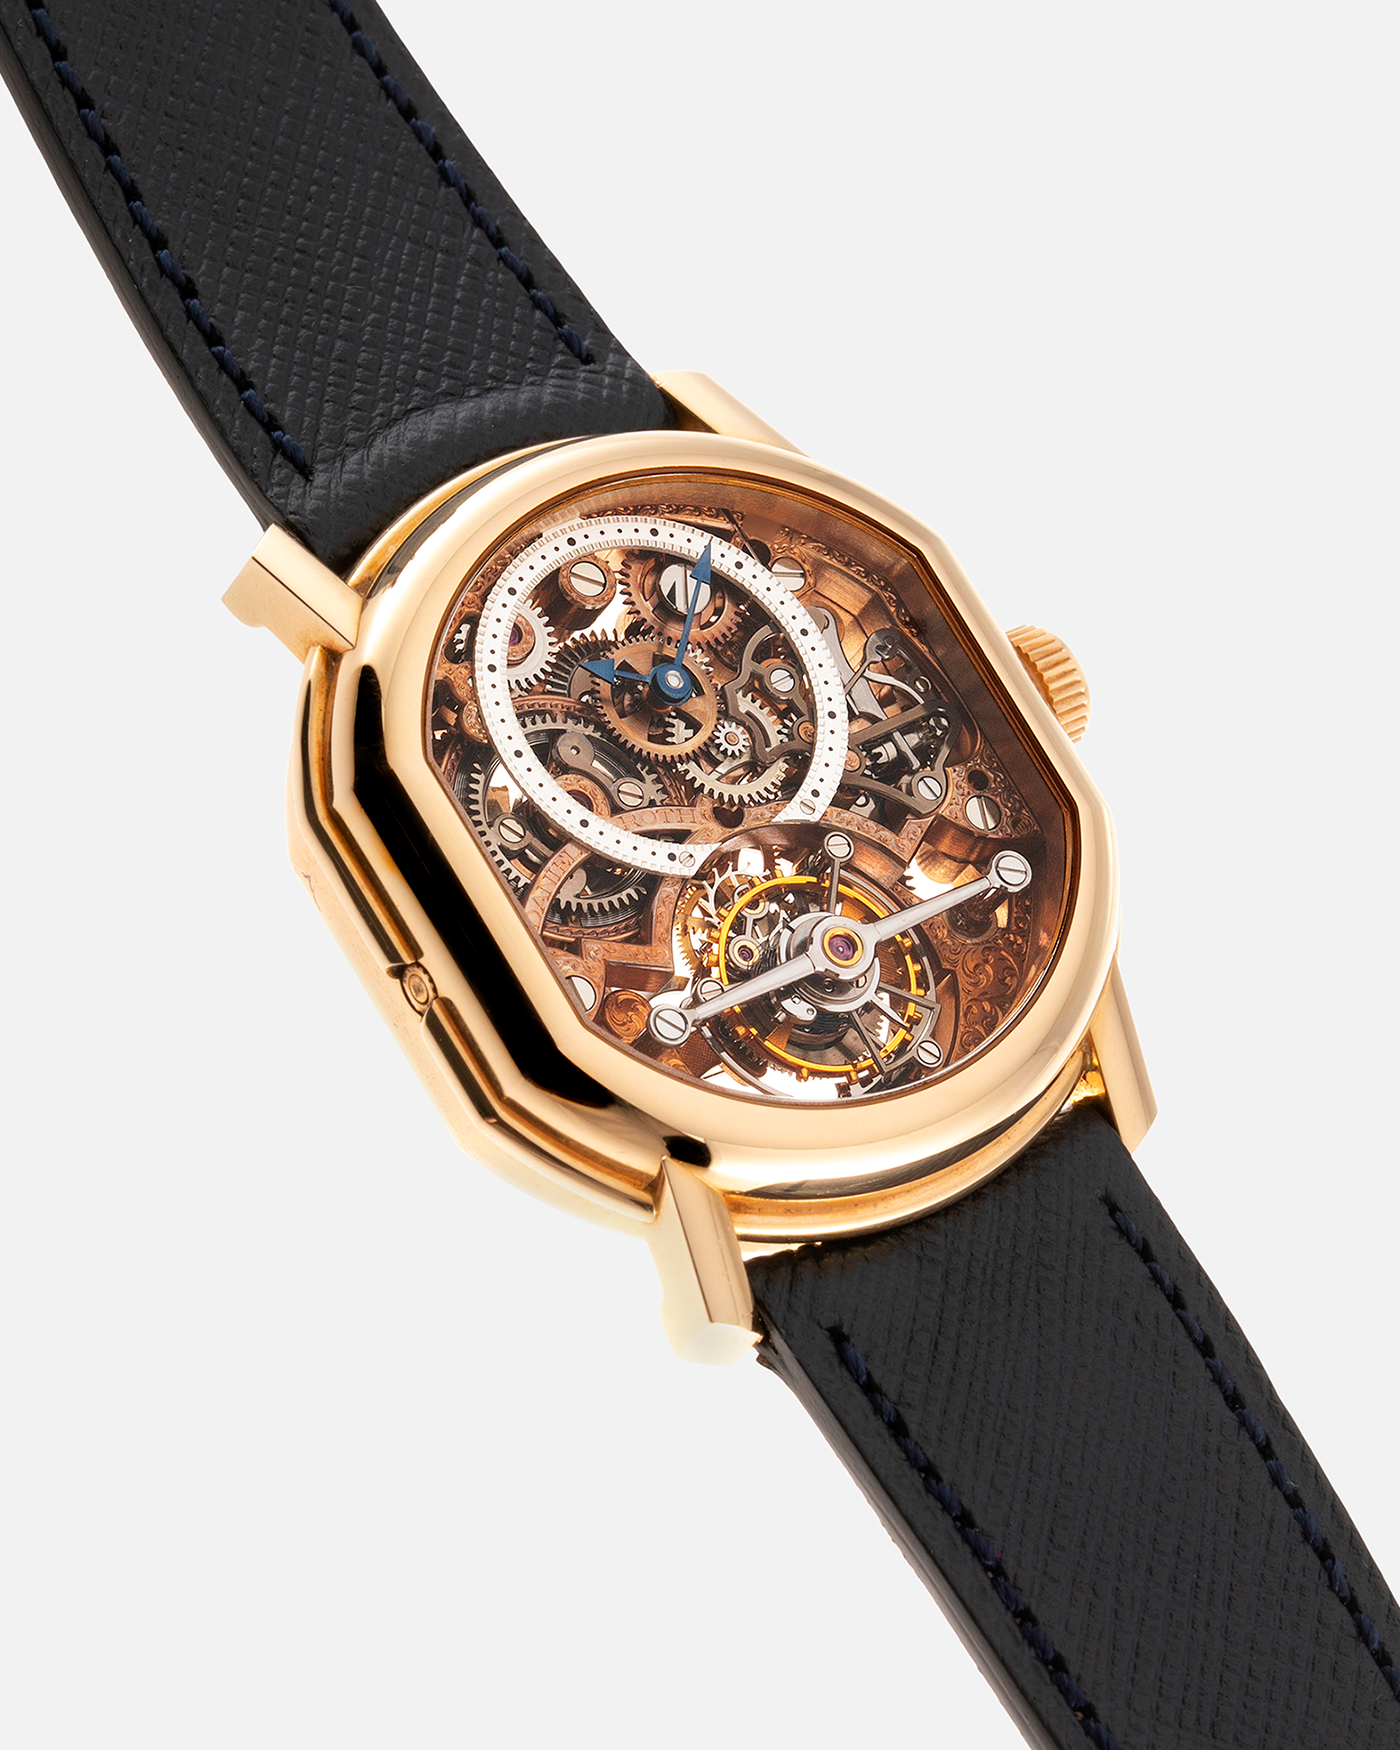 Brand: Daniel Roth Year: 1990’s Model: 2187 Material: 18k Yellow Gold Movement: Cal. DR 307 One-Minute Tourbillon Regulator Case Diameter: 35mm X 38mm Strap: Molequin Navy Blue Textured Calf and18k Yellow Gold Tang Buckle